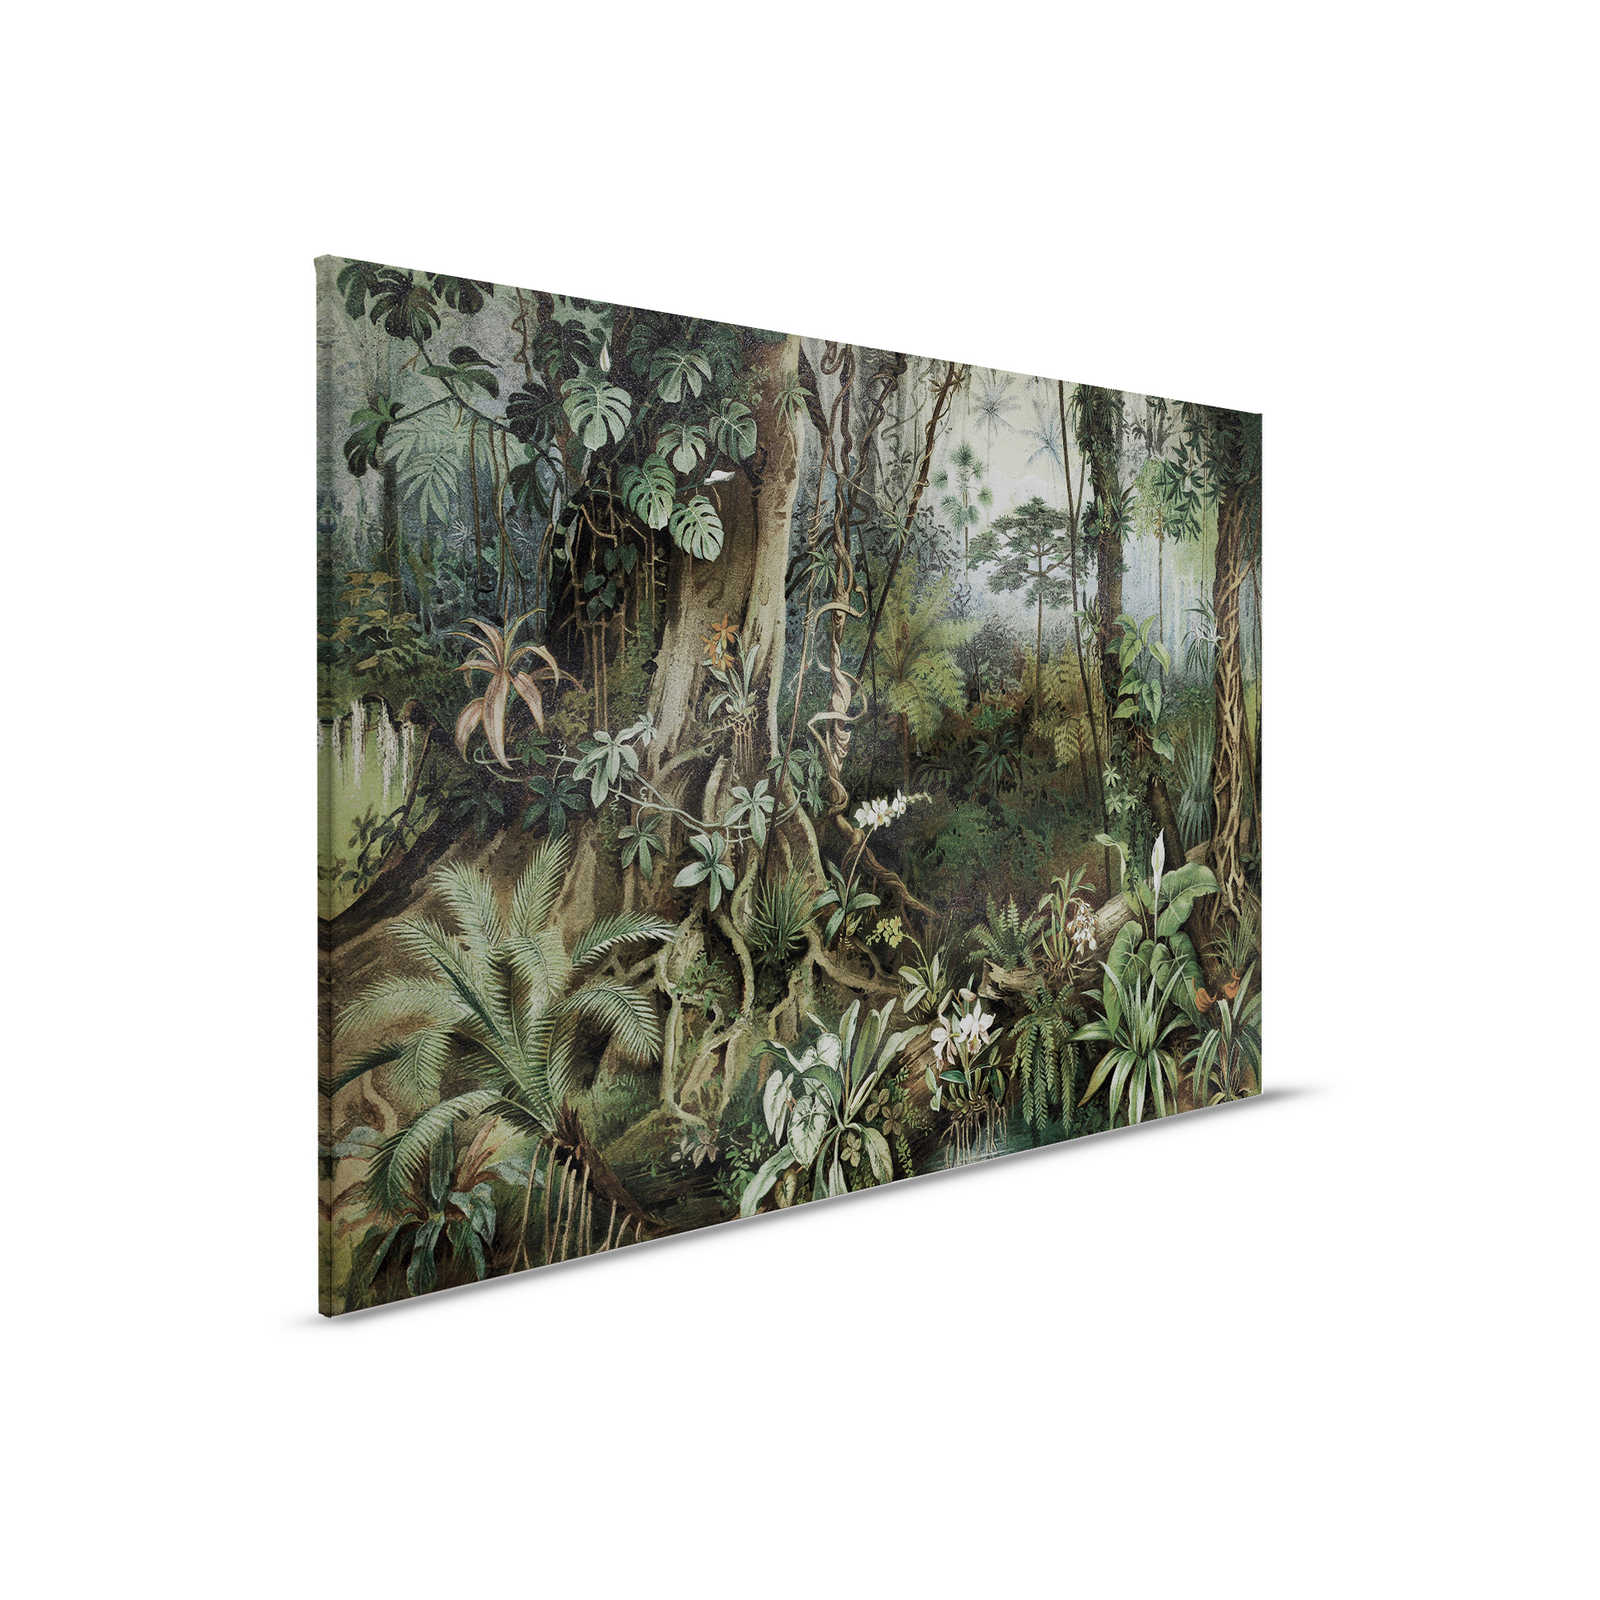         Jungle canvas picture in drawing style | walls by patel - 0,90 m x 0,60 m
    